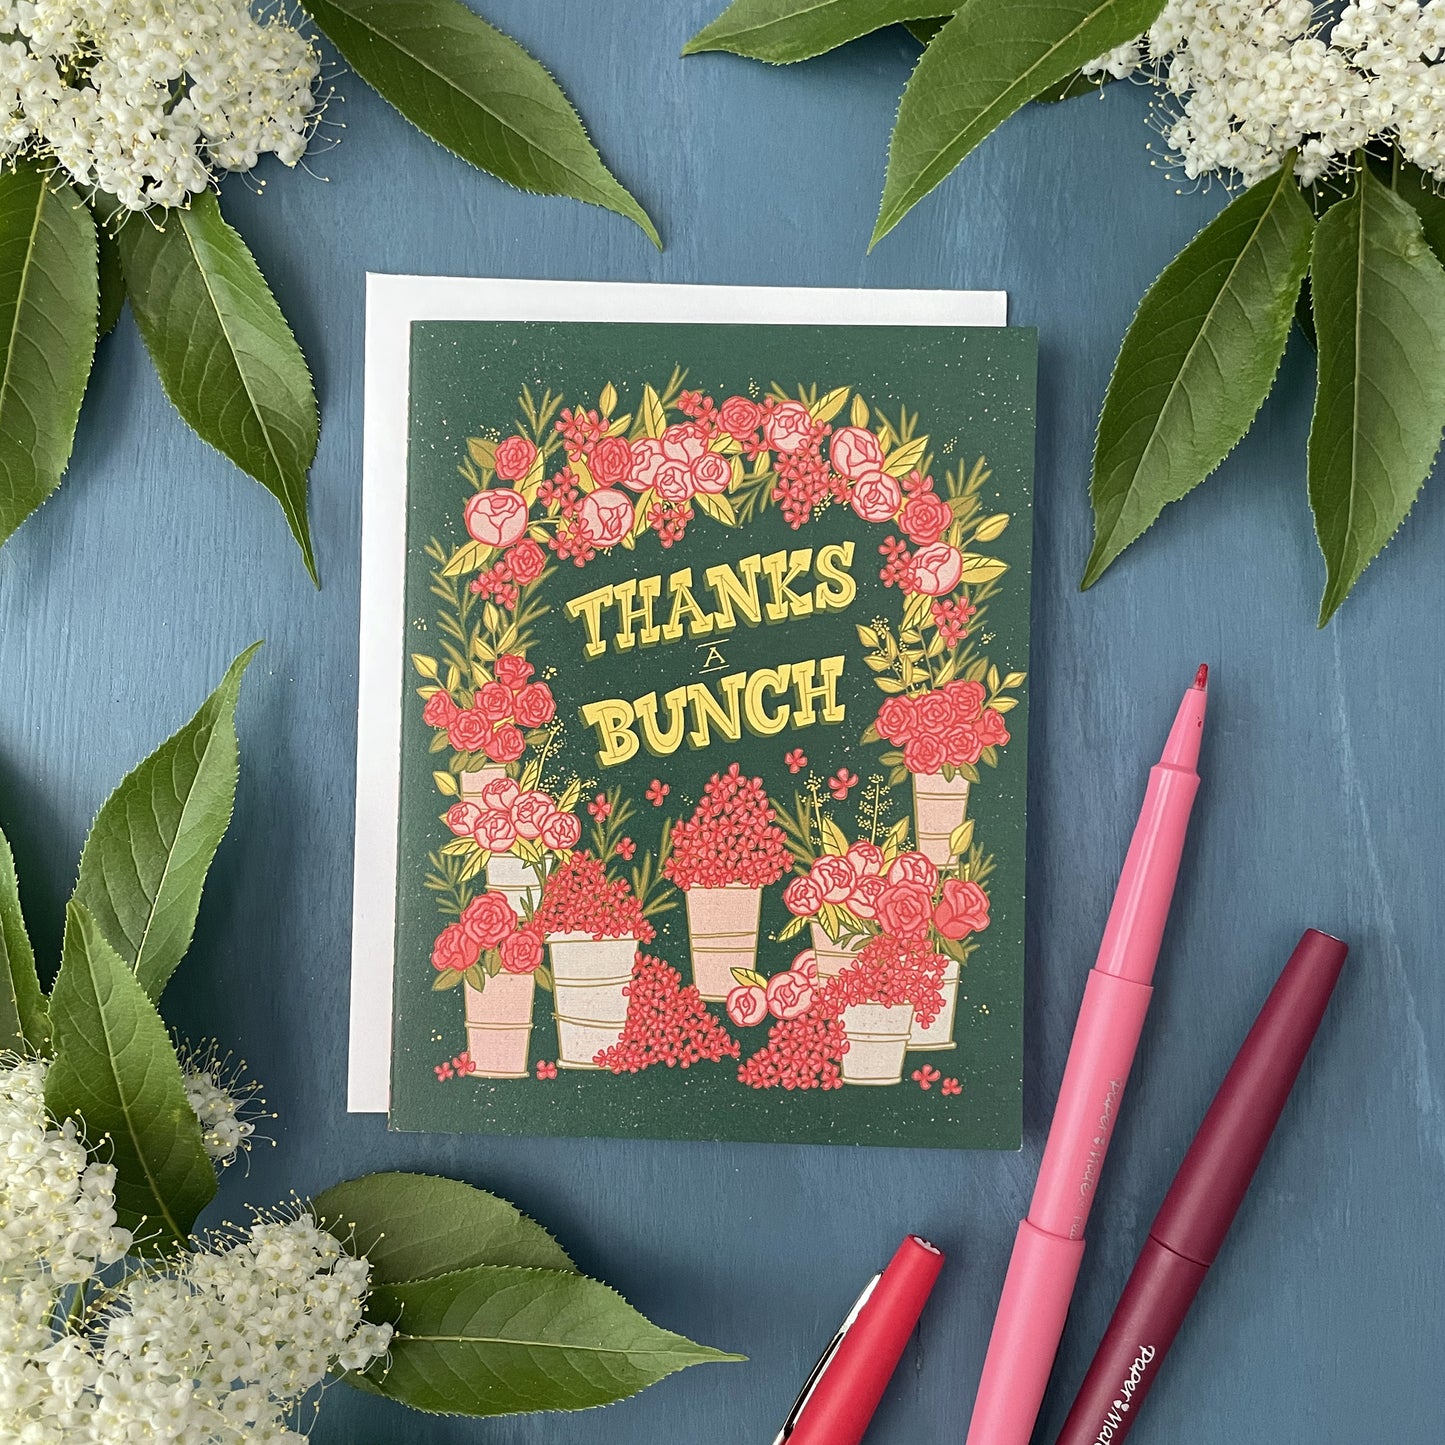 A dark green greeting card shows an arch covered in pink flowers with buckets of flowers at the bottom. It reads Thanks a Bunch in yellow letters. It is on a blue background flanked by white flowers, leaves and felt-tip pens.